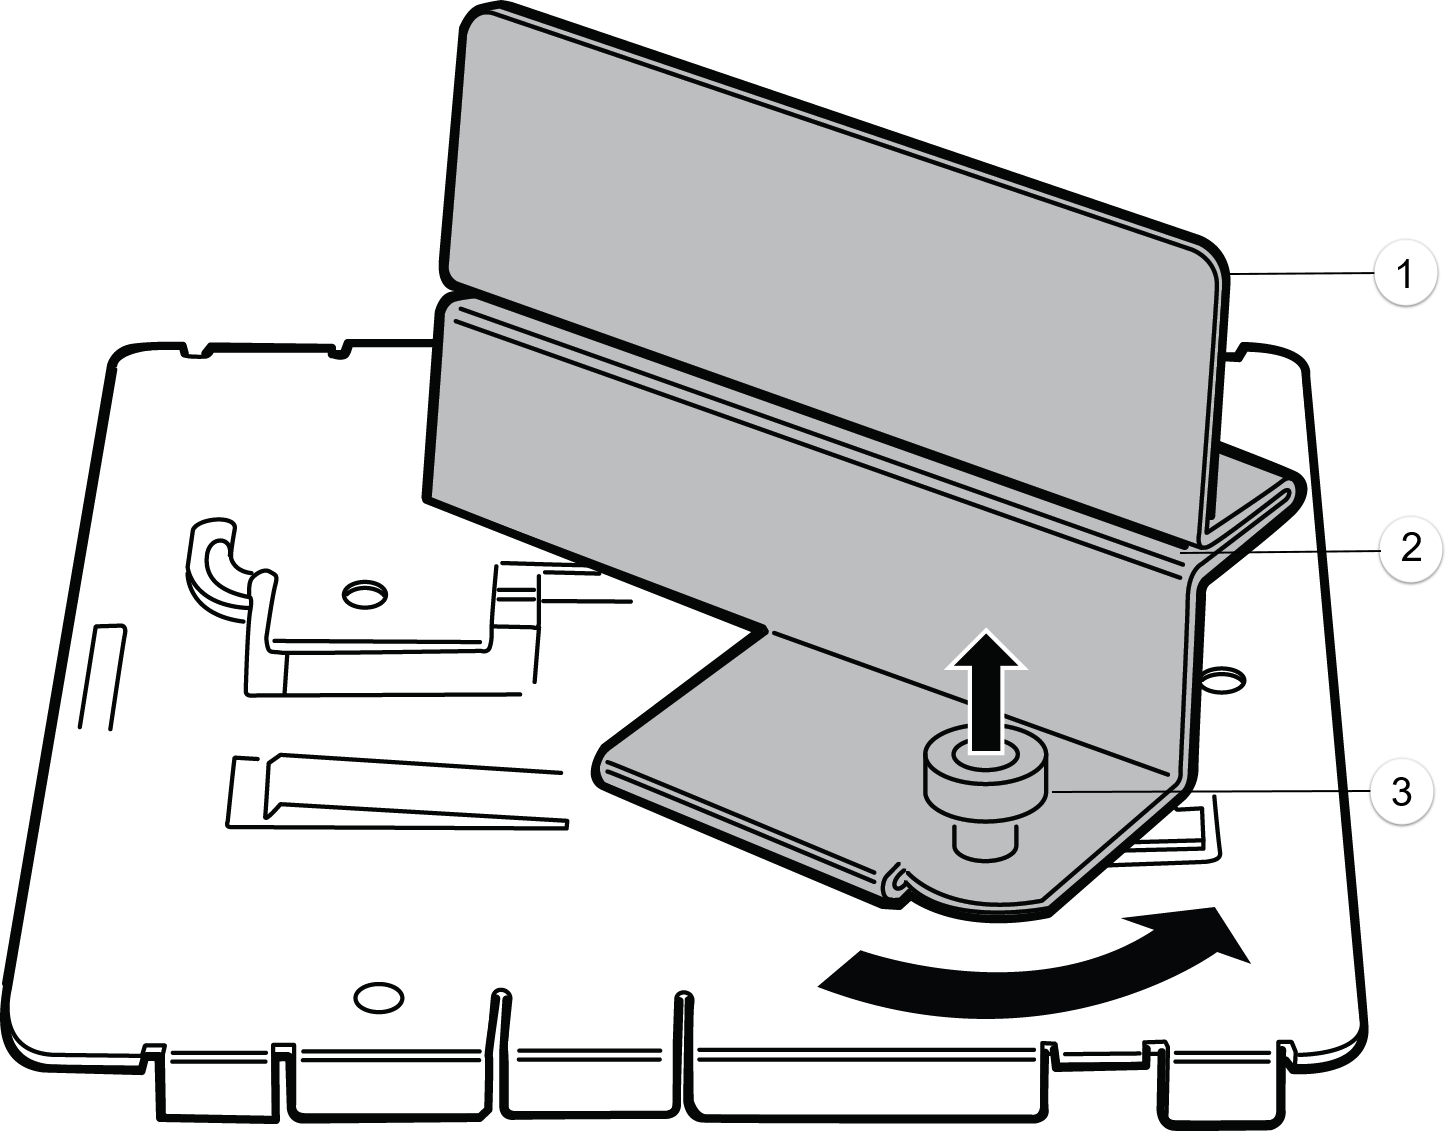 Image of the KT-135628-01 adapter being attached to the stainless-steel mounting bracket